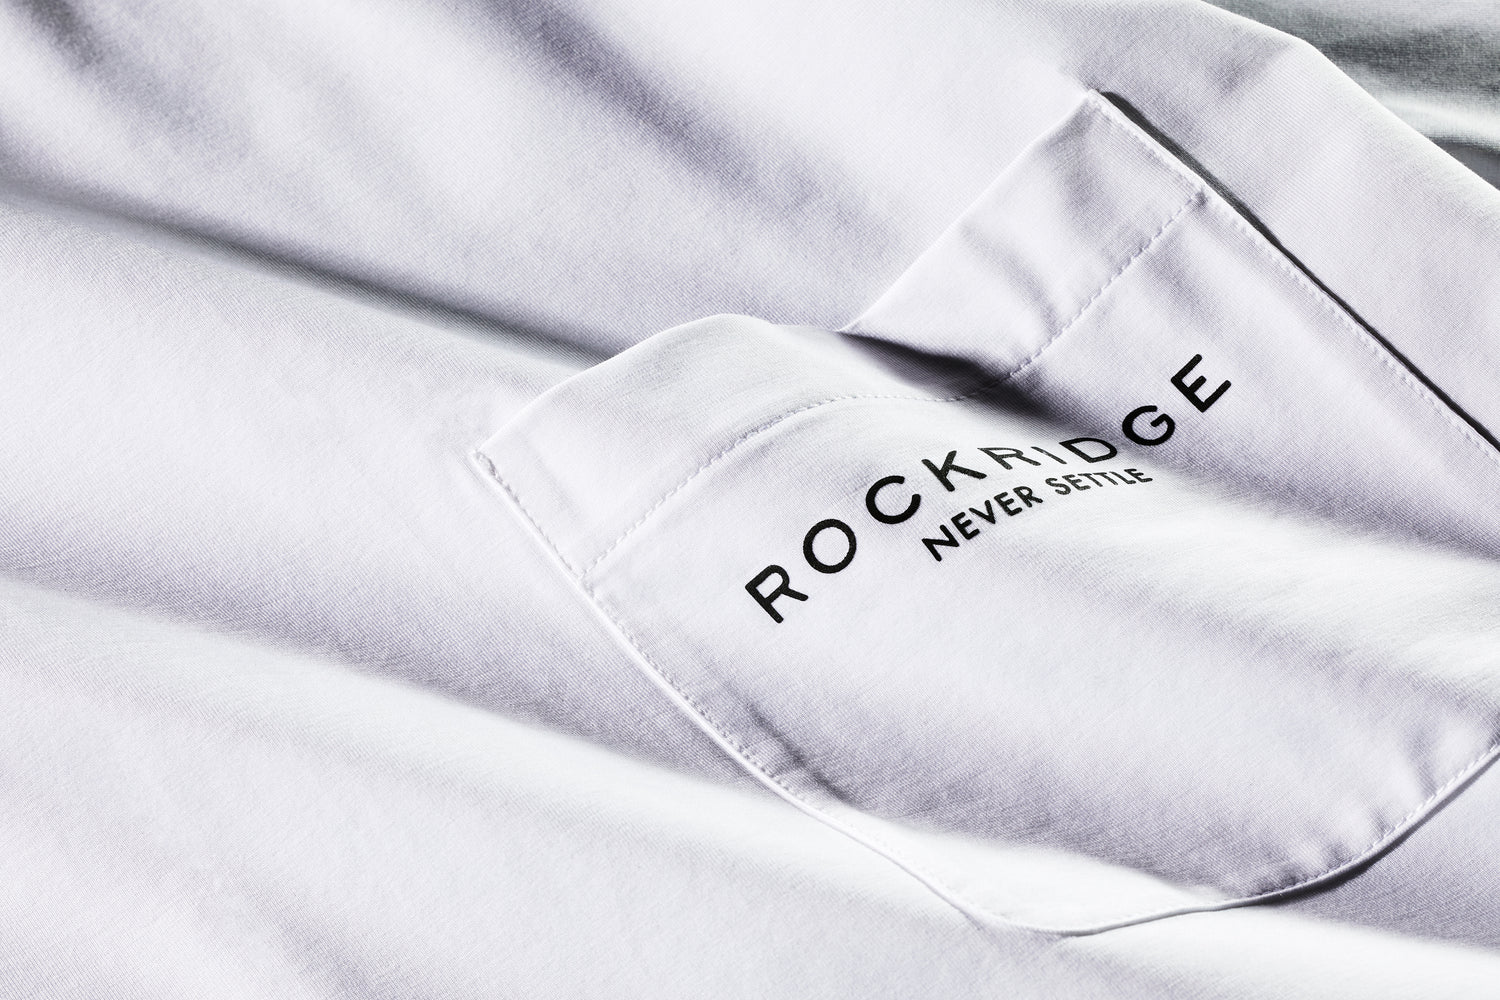 The Rockridge t-shirt was designed for today’s entrepreneurs and leaders in mind, making this t-shirt an easy choice for everyday wear.